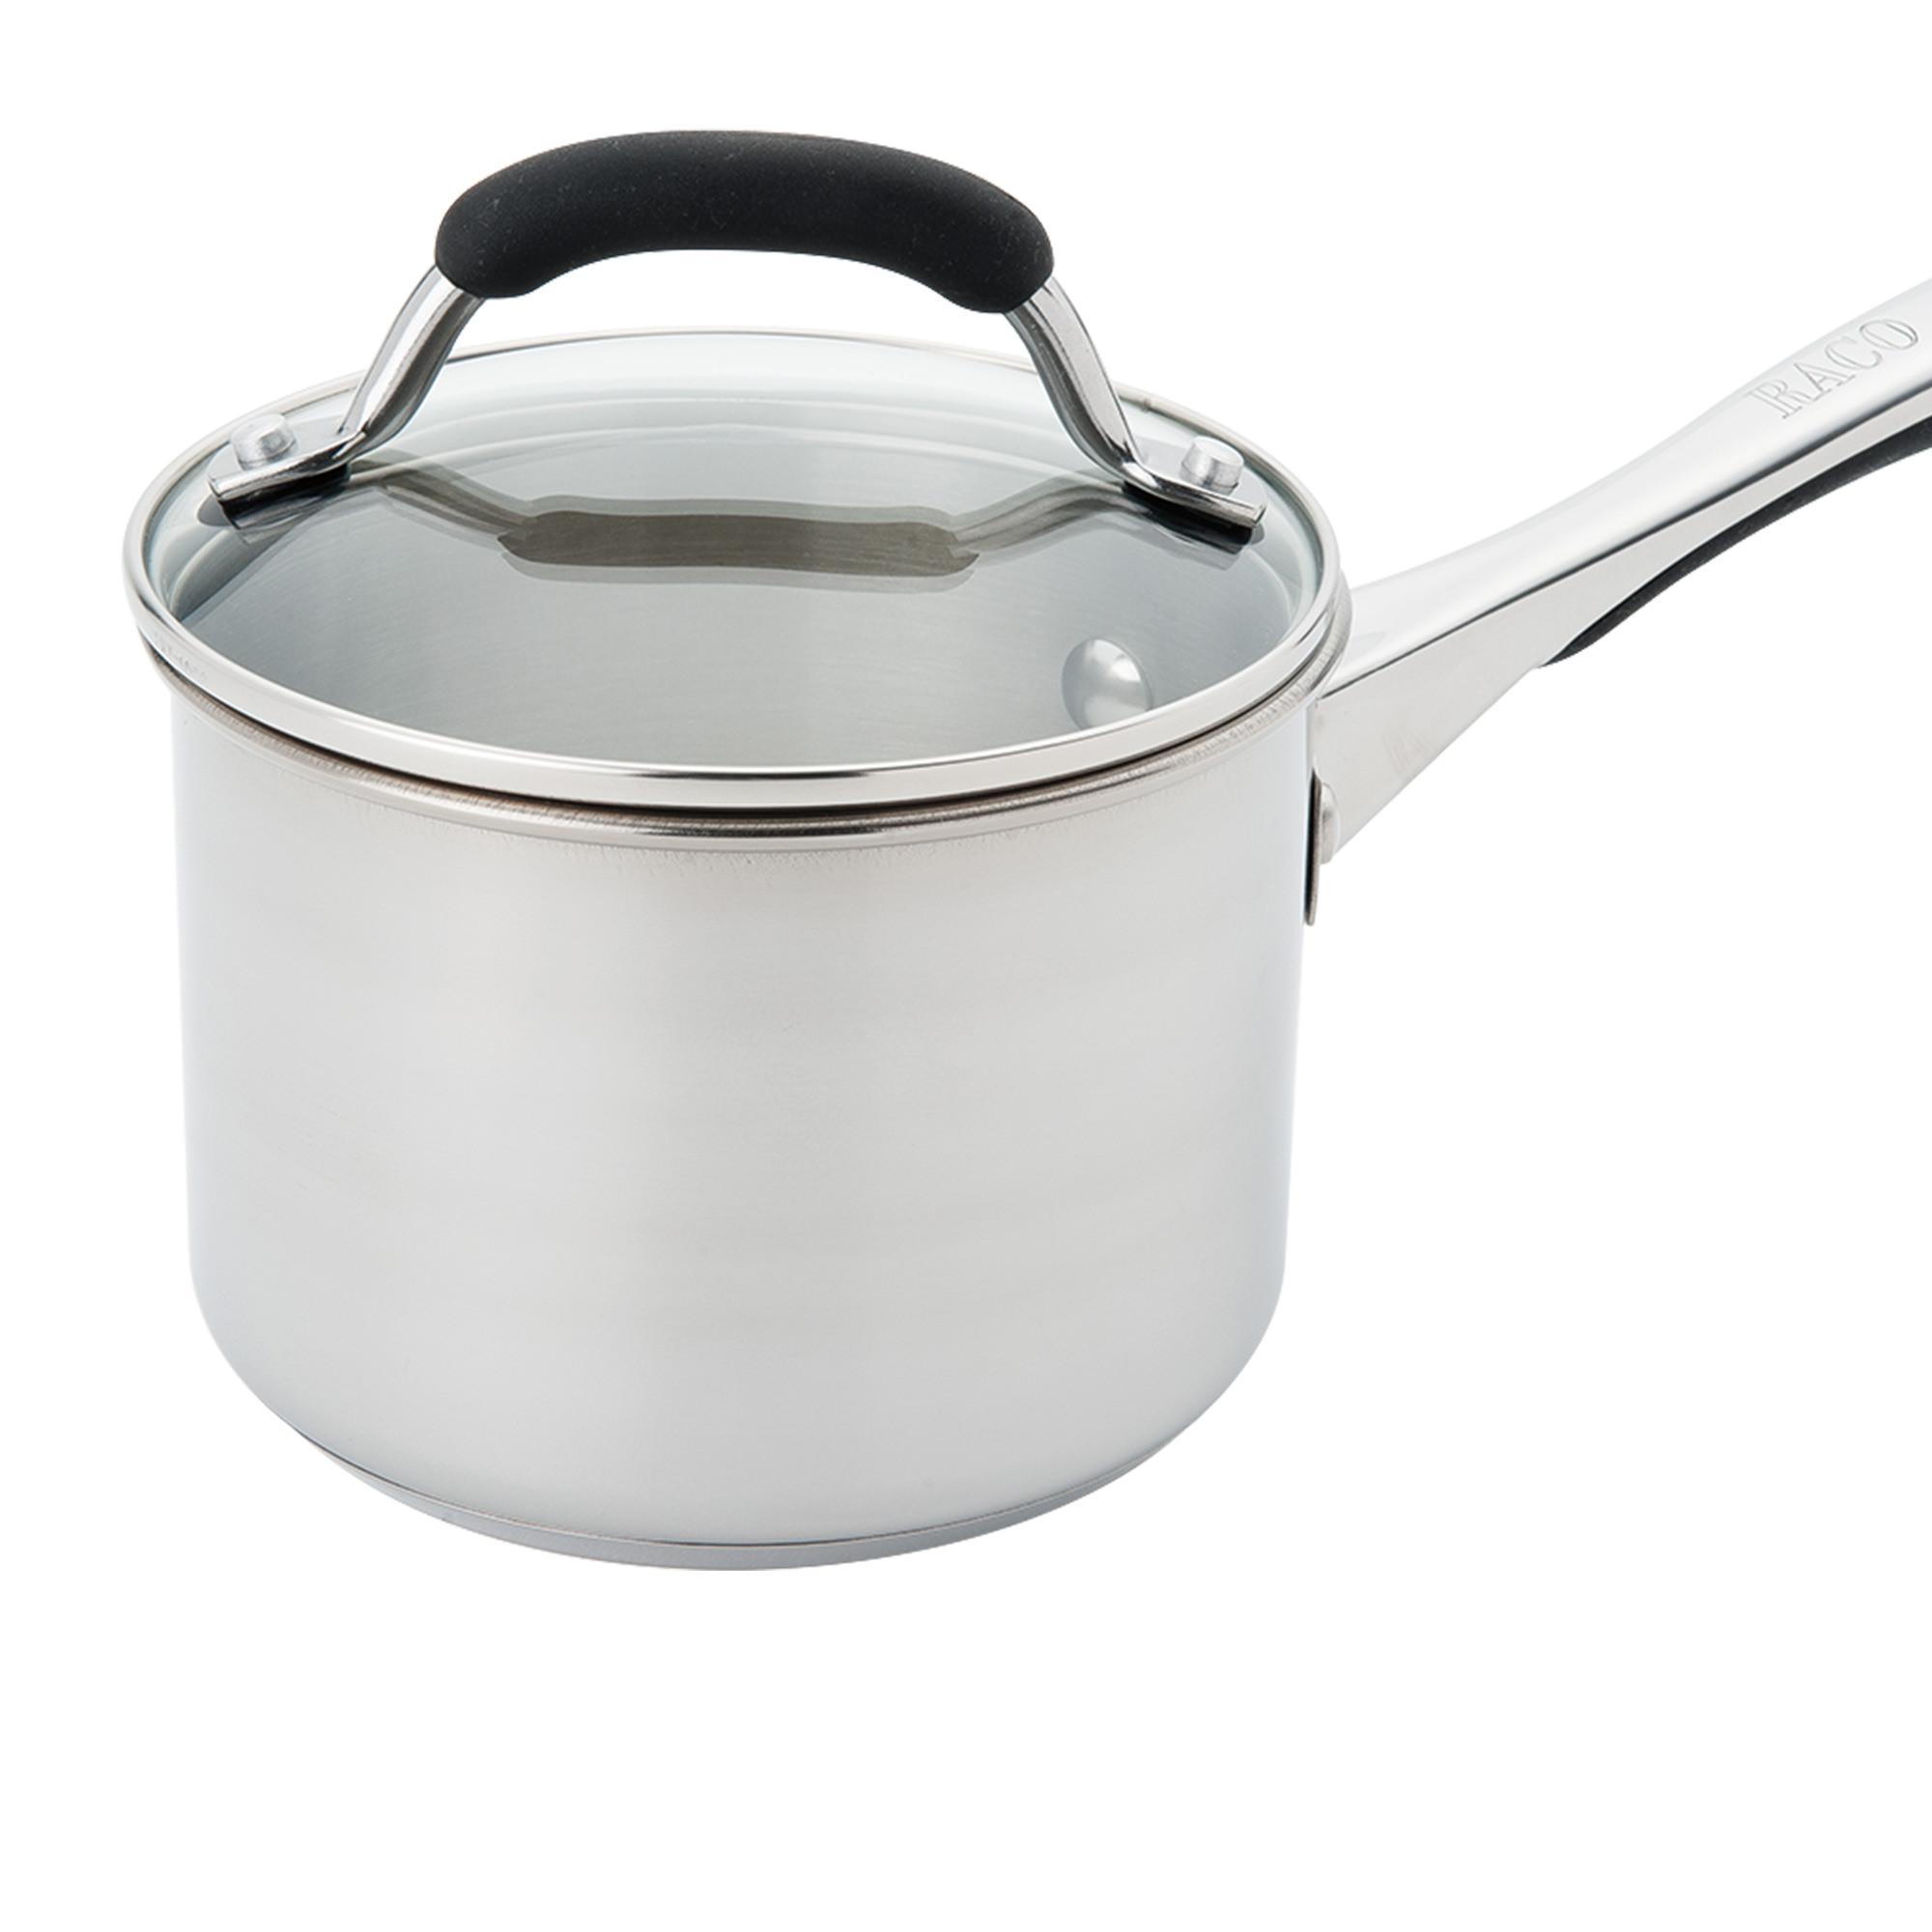 Raco Contemporary Stainless Steel Saucepan 14cm - 1.4L Image 4